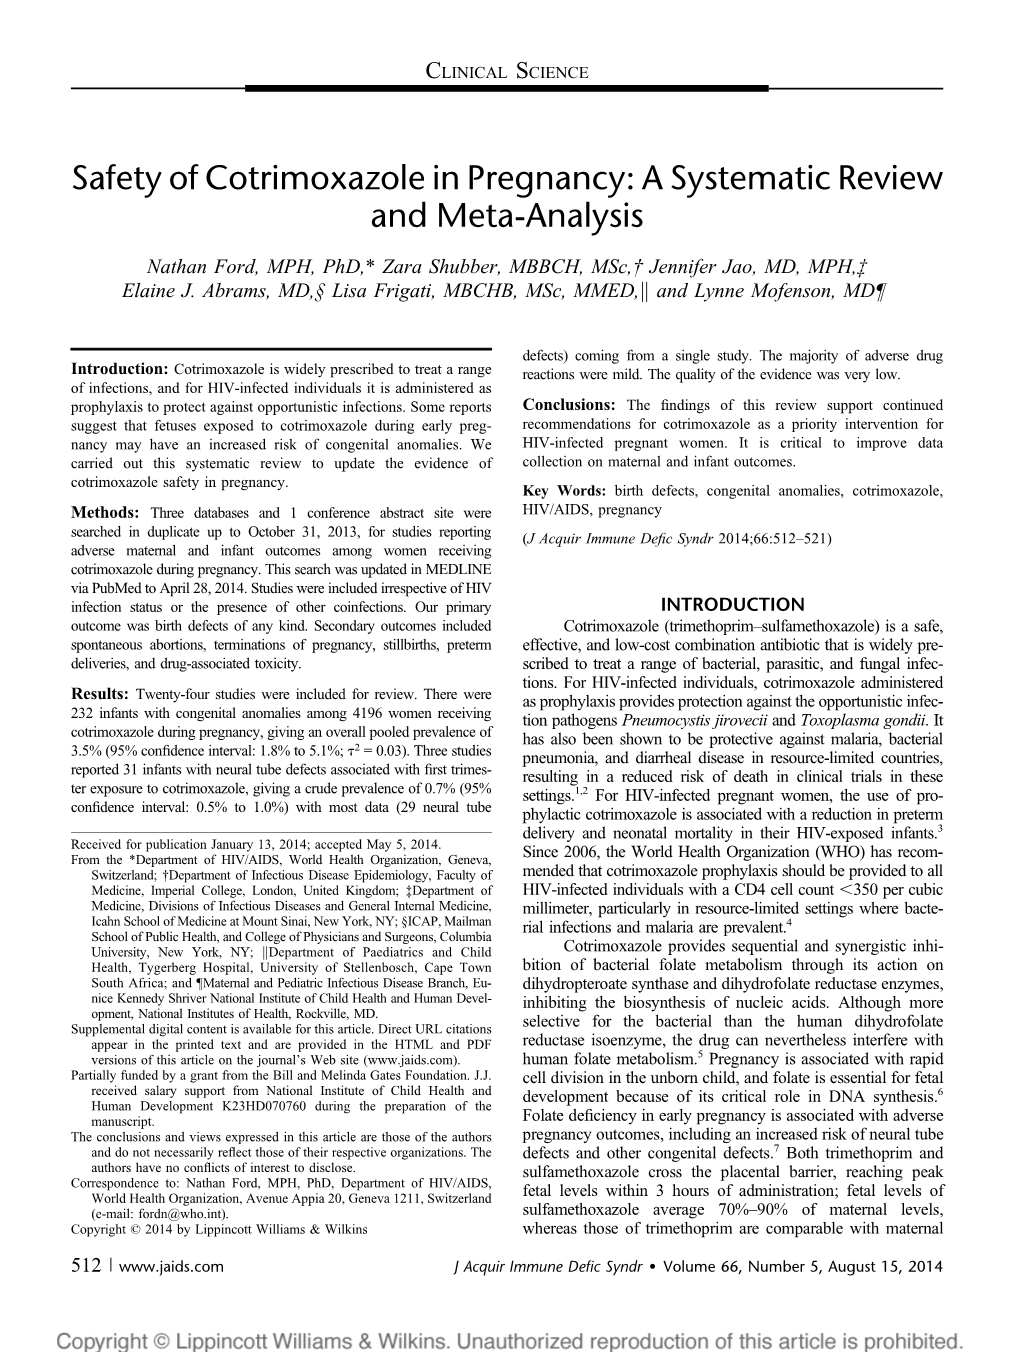 Safety of Cotrimoxazole in Pregnancy: a Systematic Review and Meta-Analysis